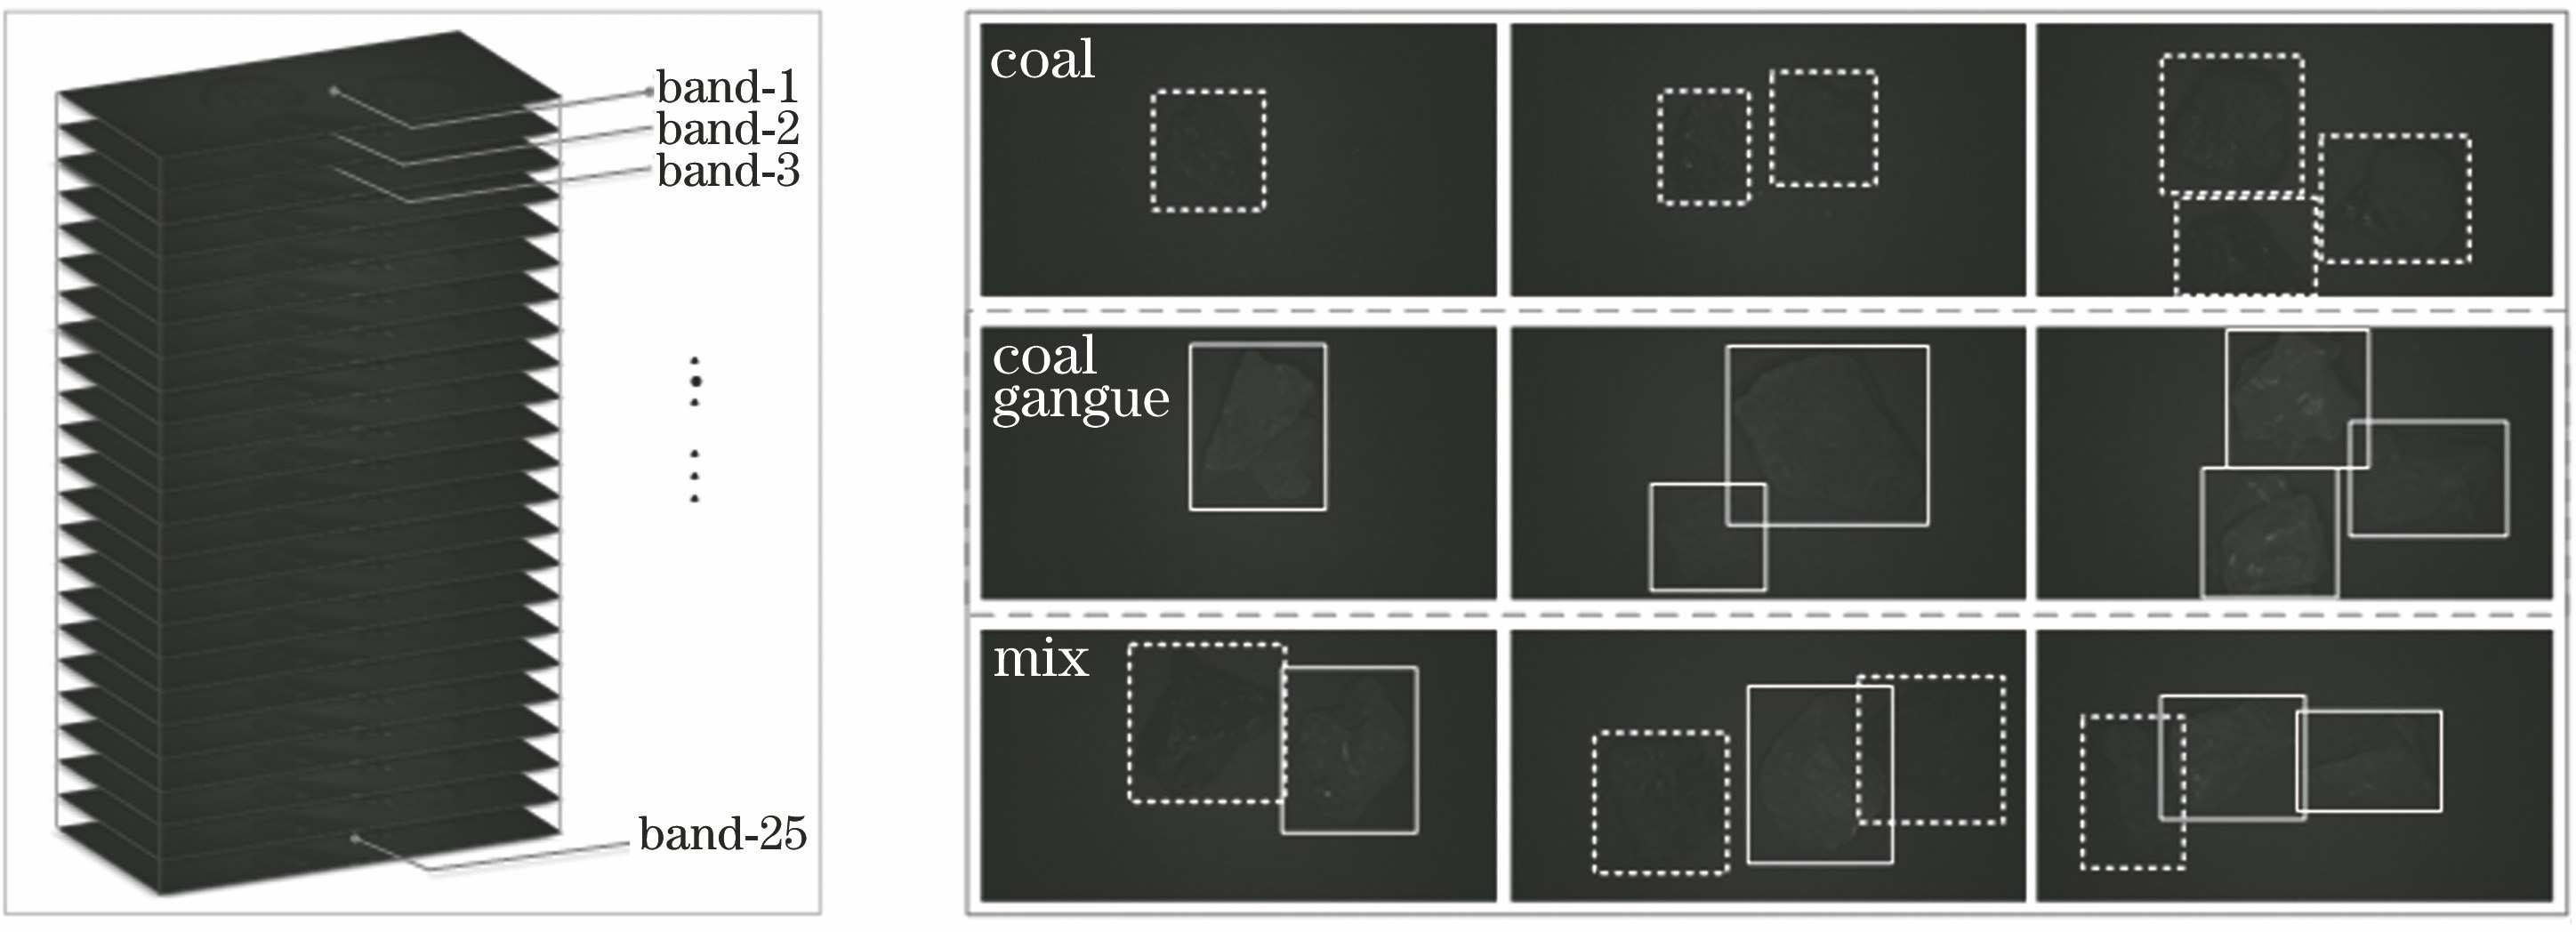 Multi-spectral image of coal and coal gangue